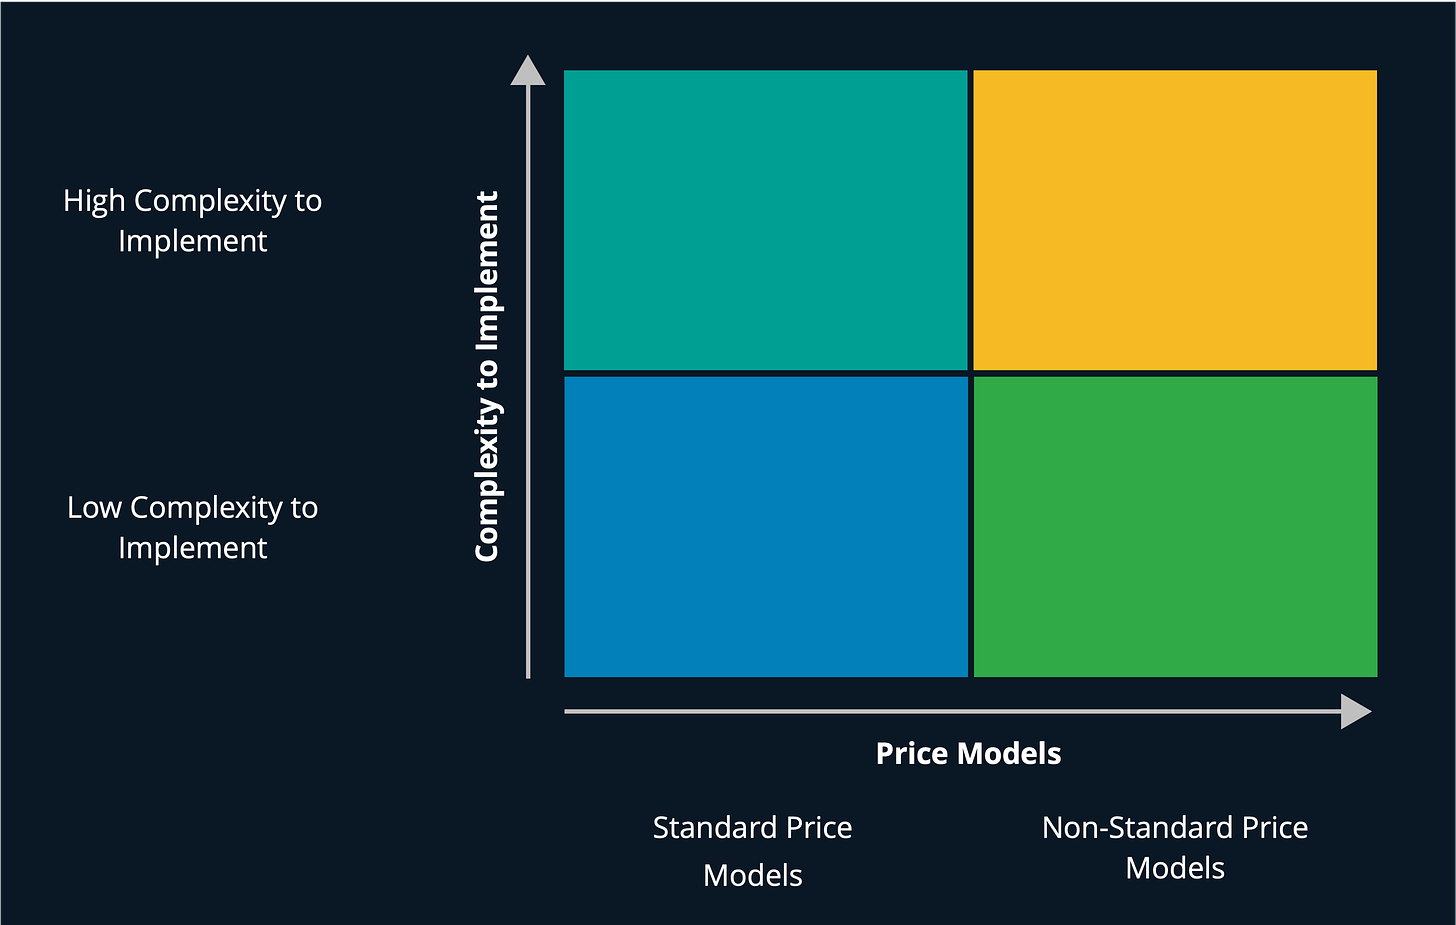 Infographic showing a way to think through pricing model choices